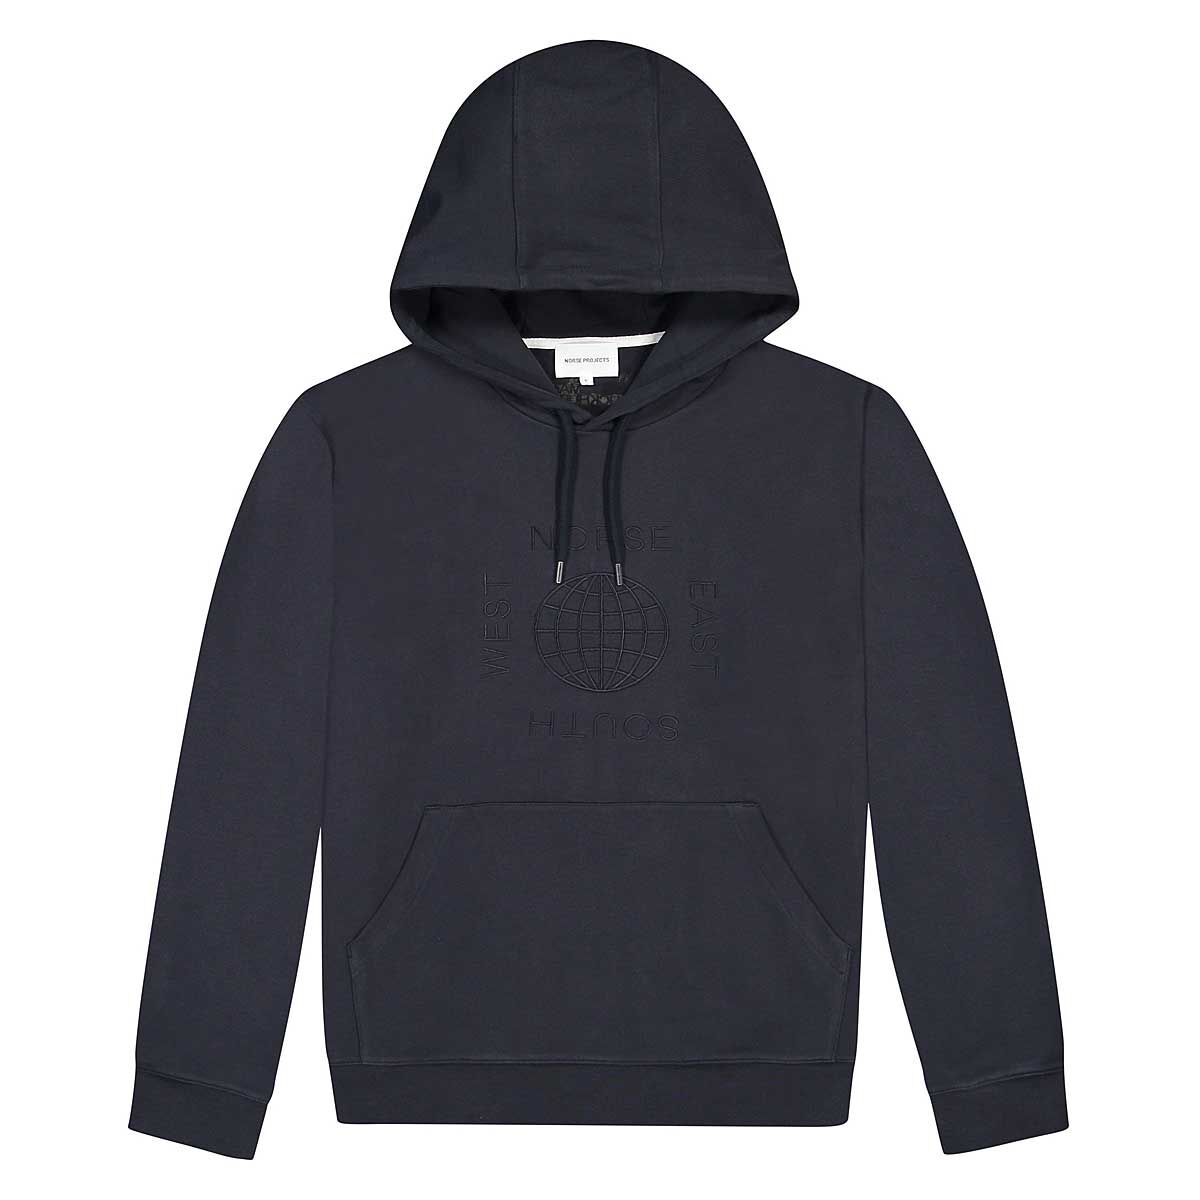 Norse Projects - high-quality products online at KICKZ.com